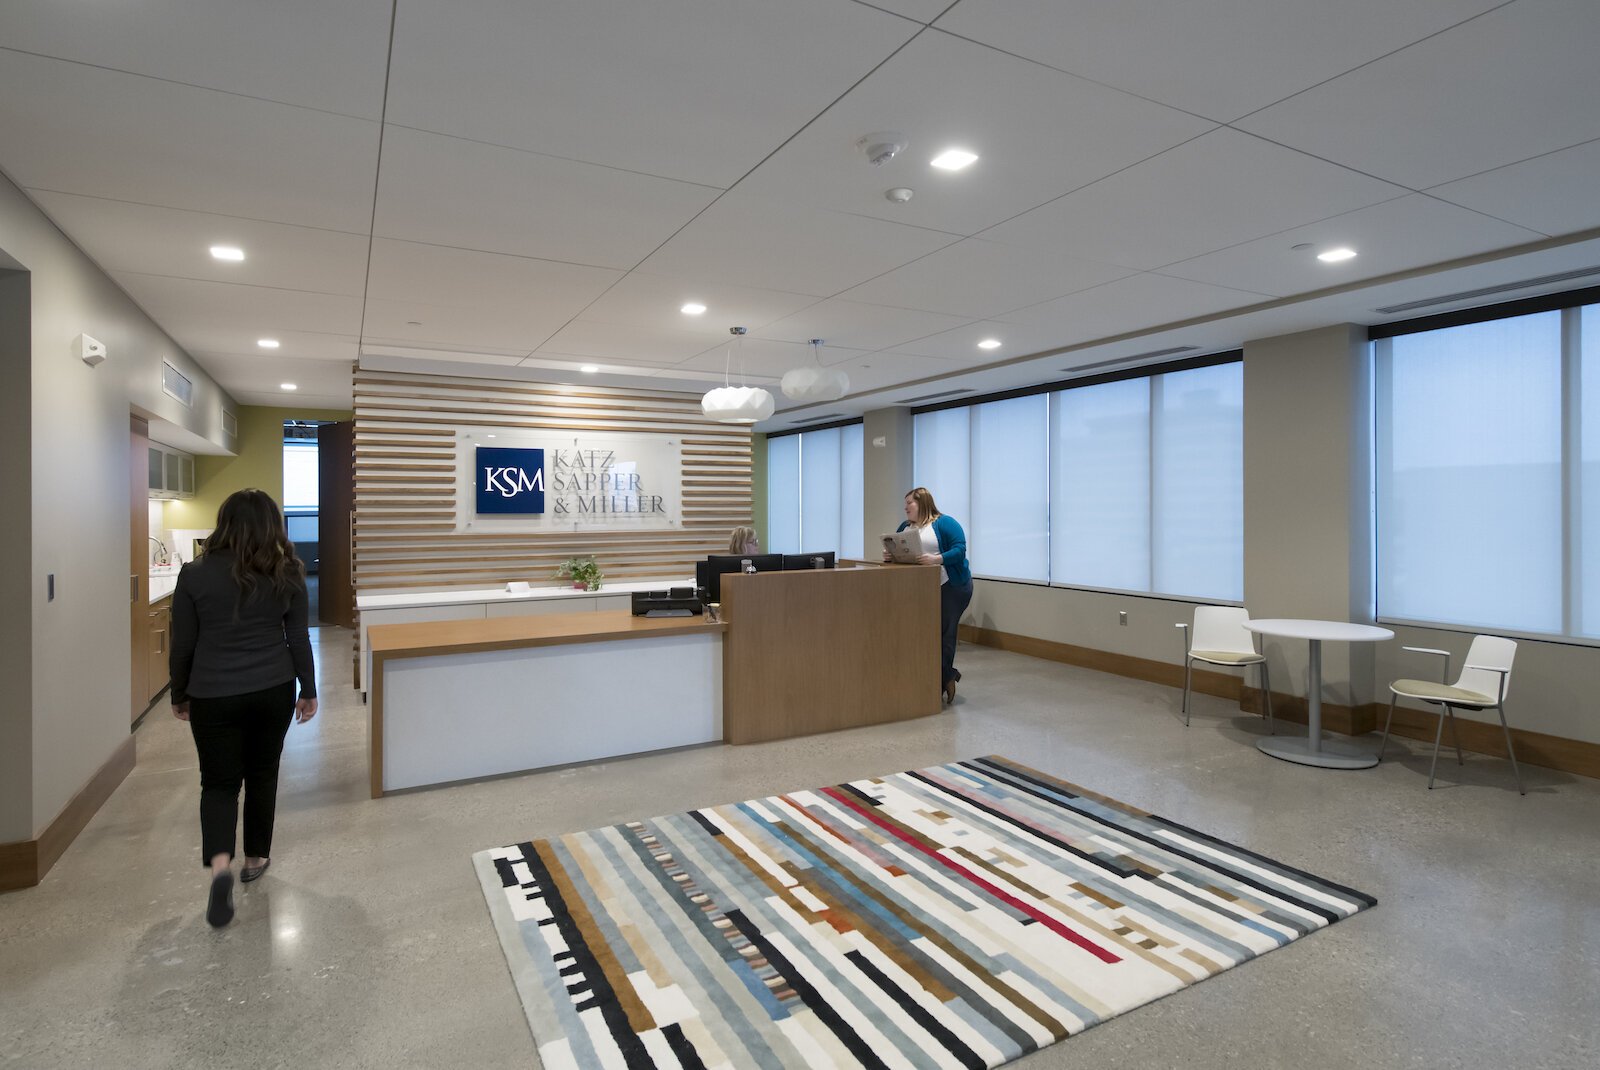 Katz, Sapper & Miller, a CPA firm with an office in Fort Wayne, added a height adjustable desk to their reception area.